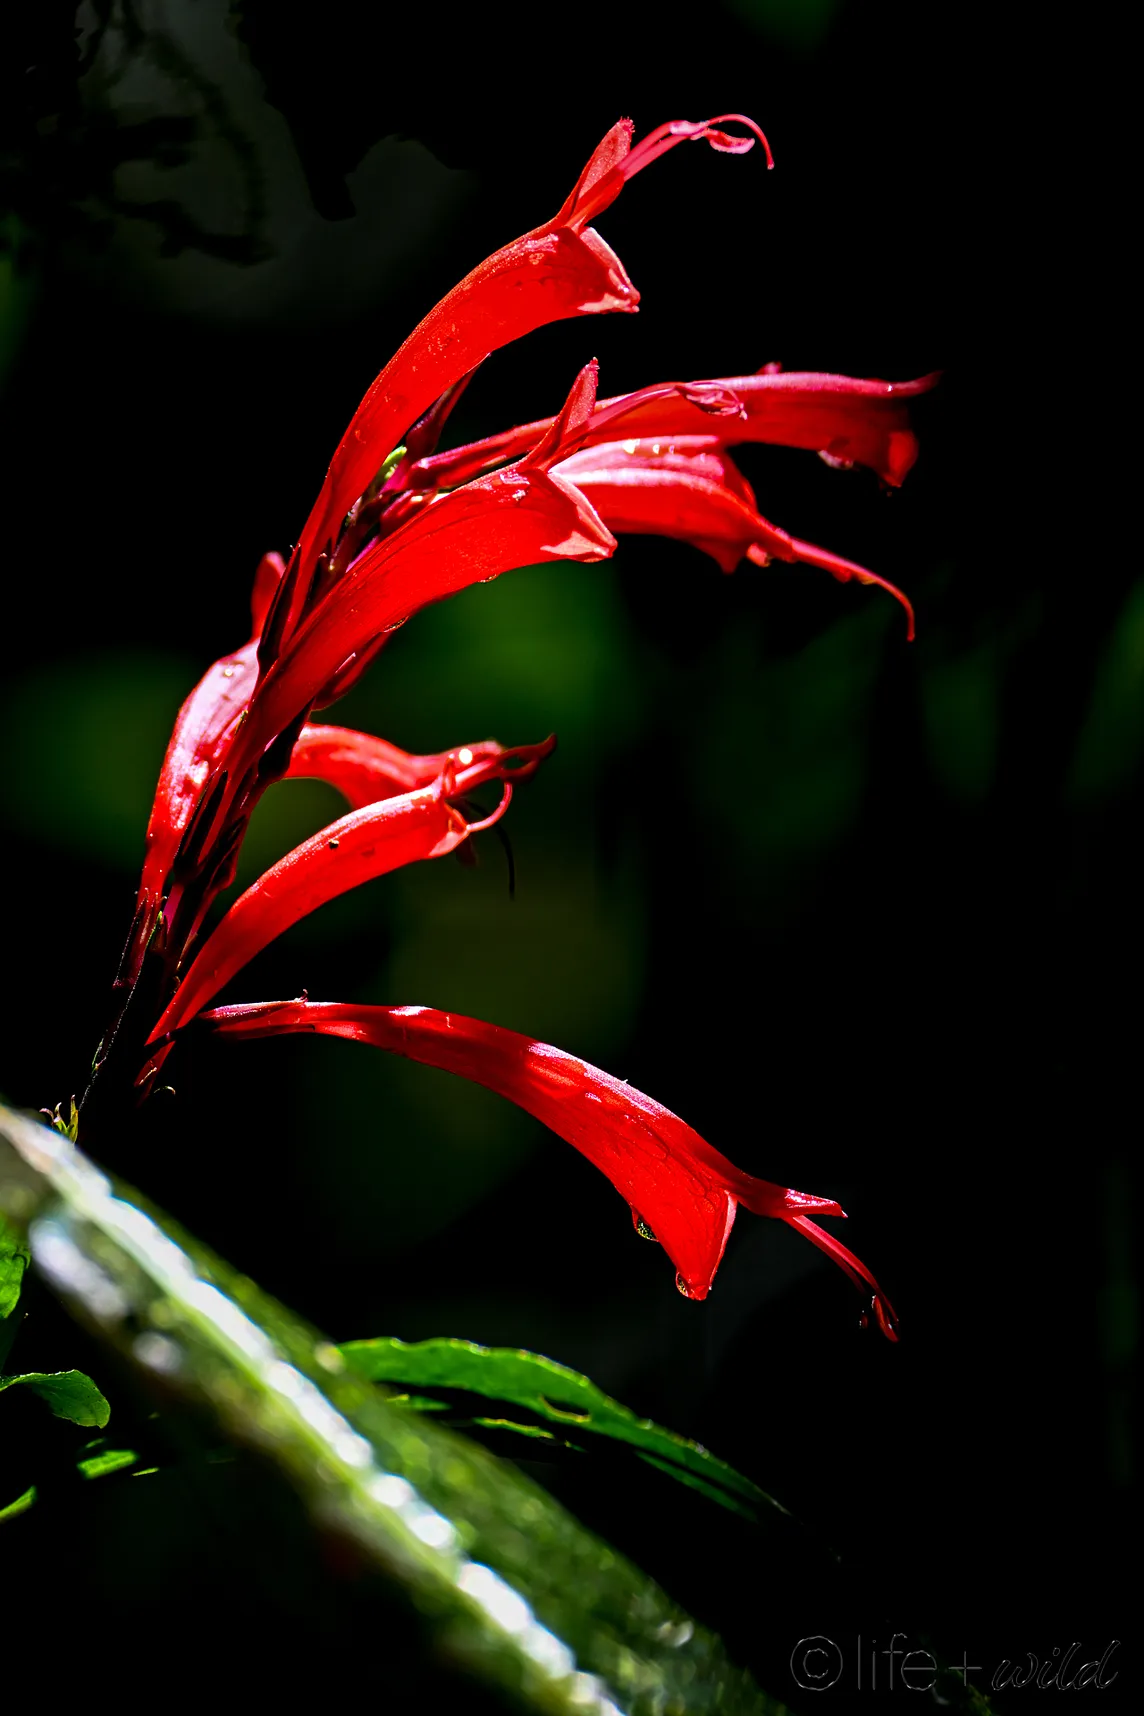 A beautiful red flower is lit up by the sun in the dark cloud forest of Monteverde, Costa Rica.